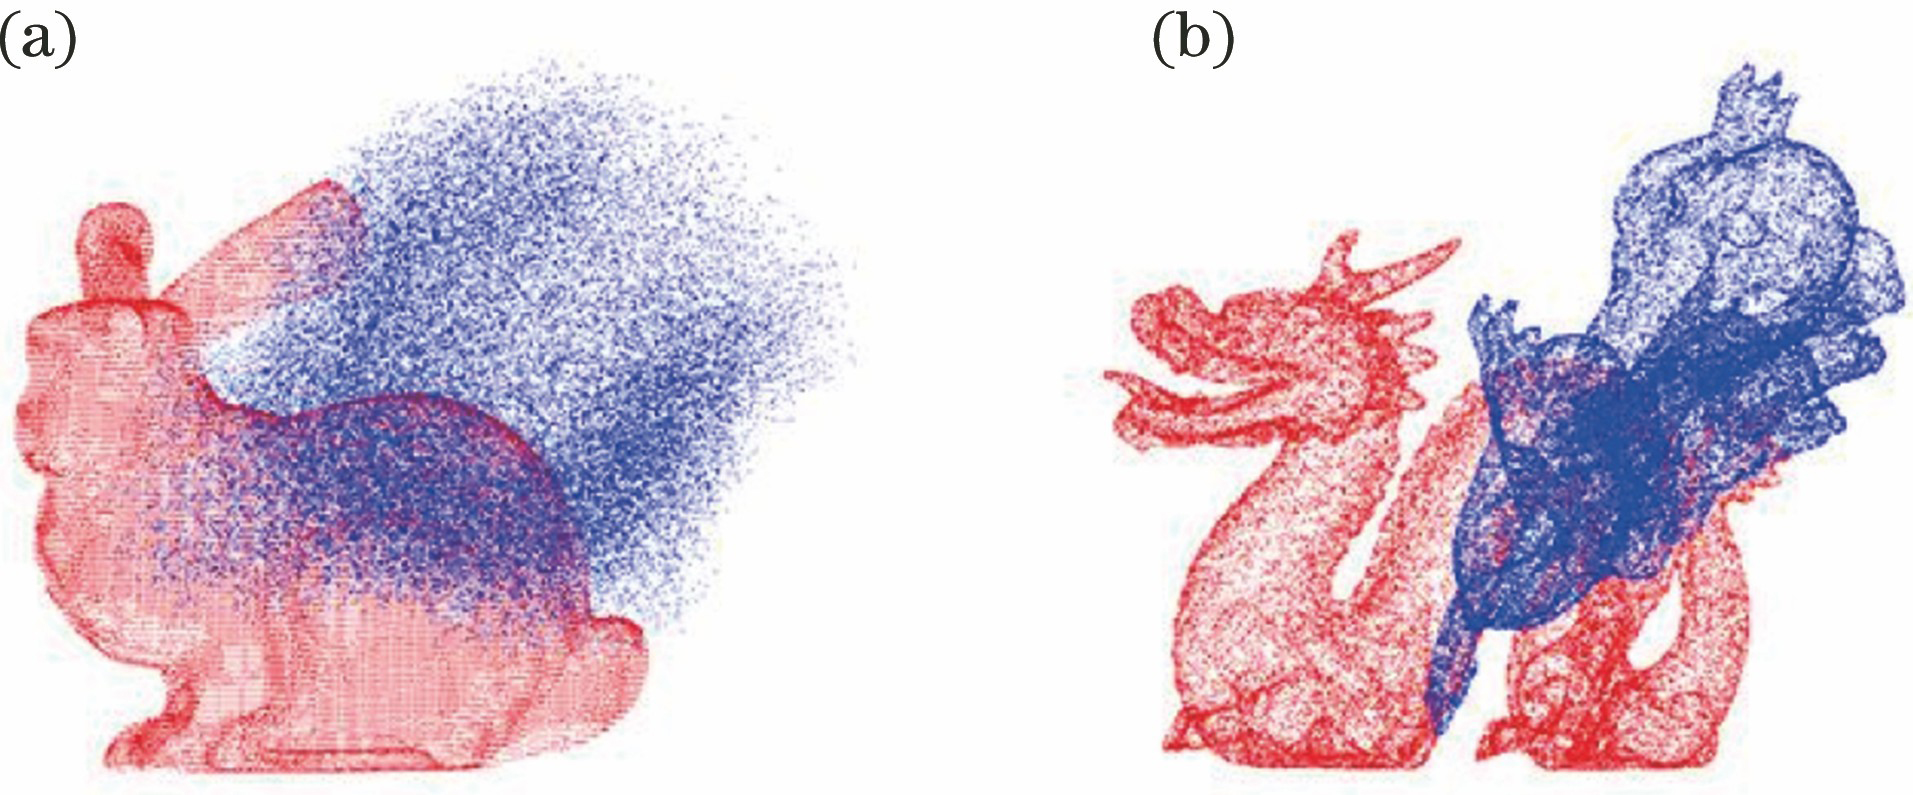 Initial state of point cloud with noise and without data loss. (a) Bunny; (b) Dragon